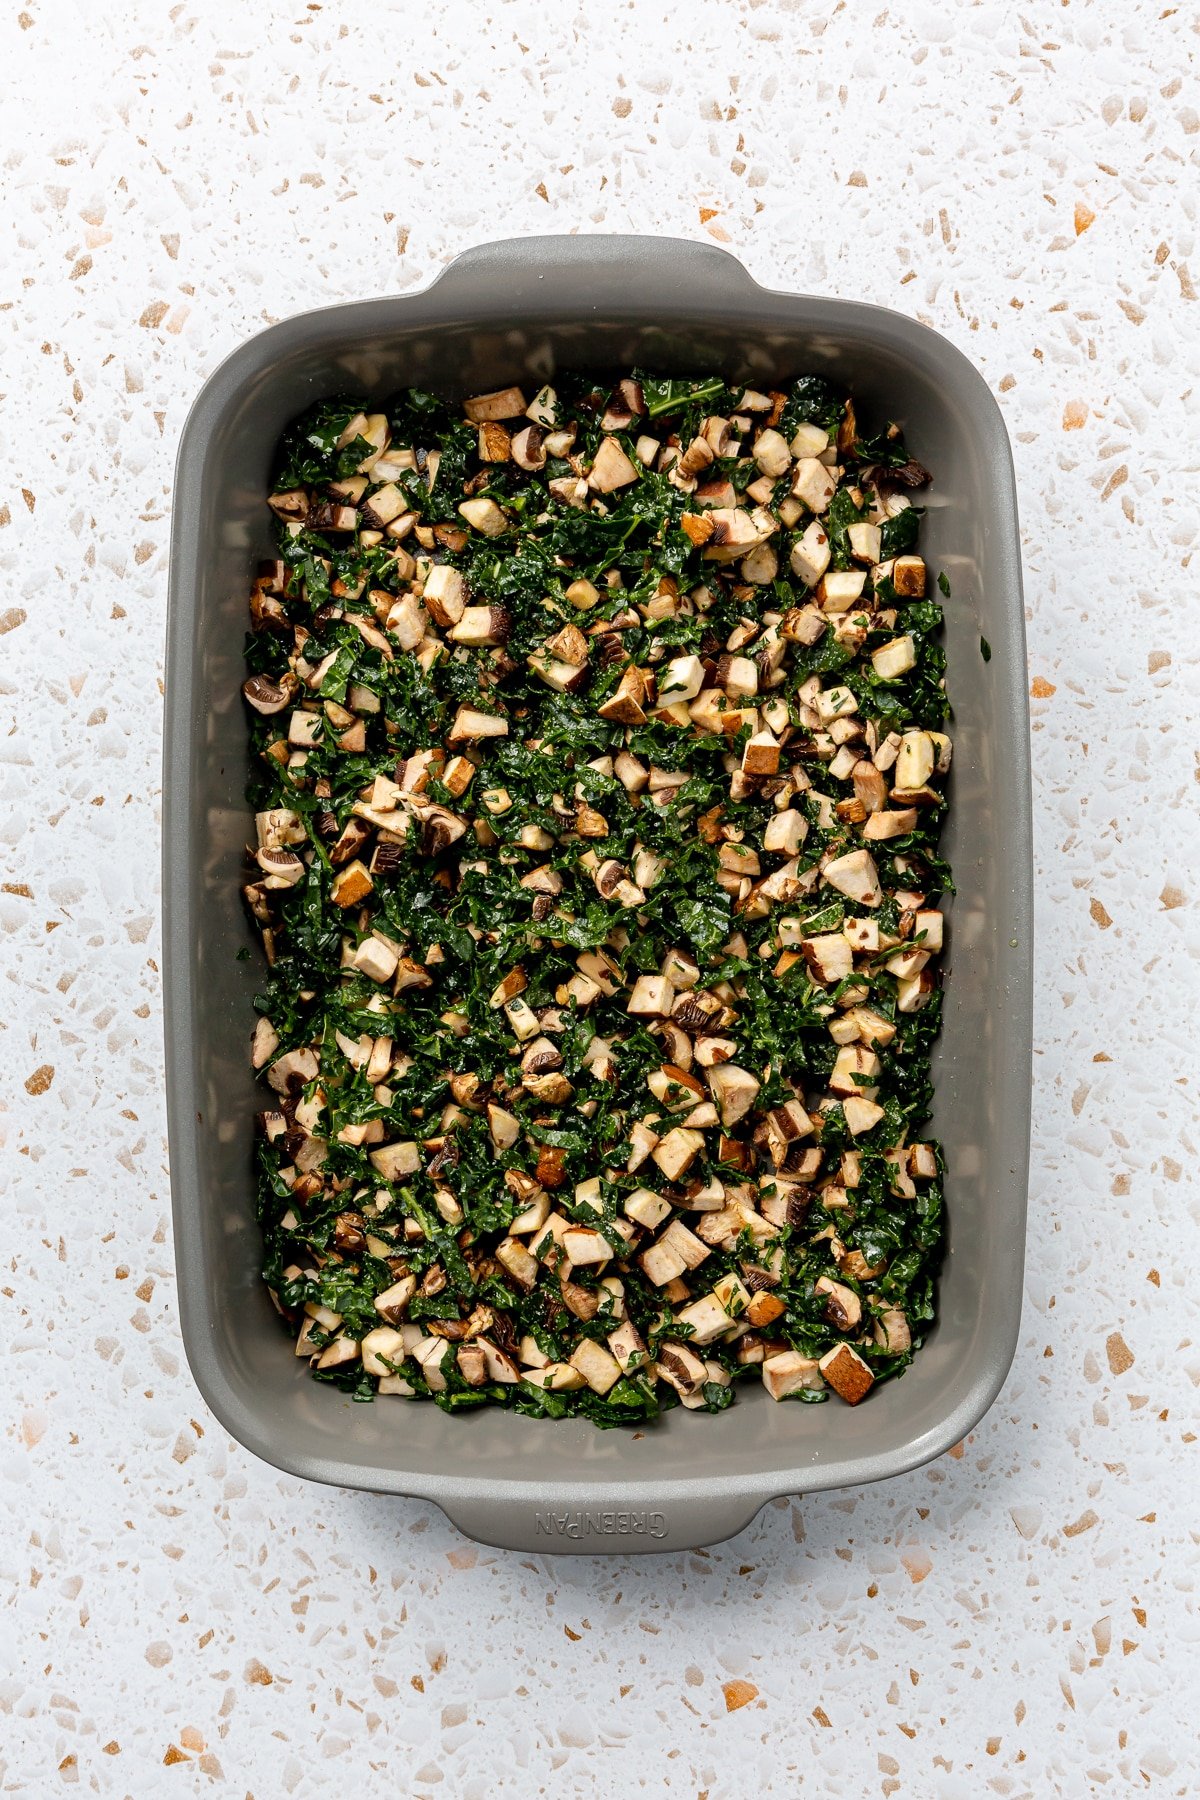 Diced mushrooms and chopped kale have been placed into the bottom of a metal baking dish.